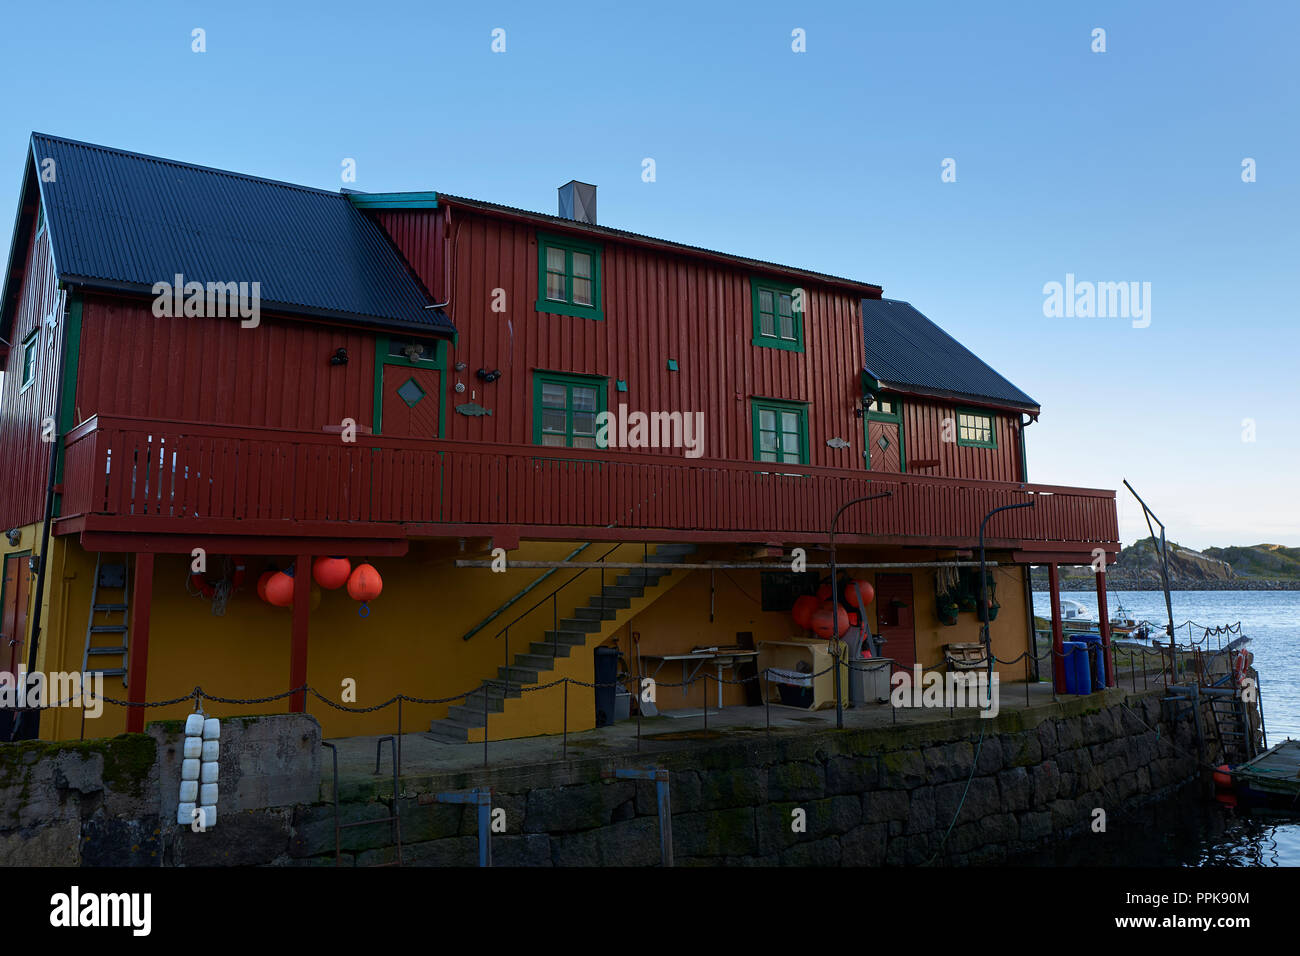 Restored Fishermen's Shacks (Rorbuer or Rorbu), Painted In The Traditional Falun Red (Falu Red), In The Fishing Village Of Stamsund, Norway. Stock Photo